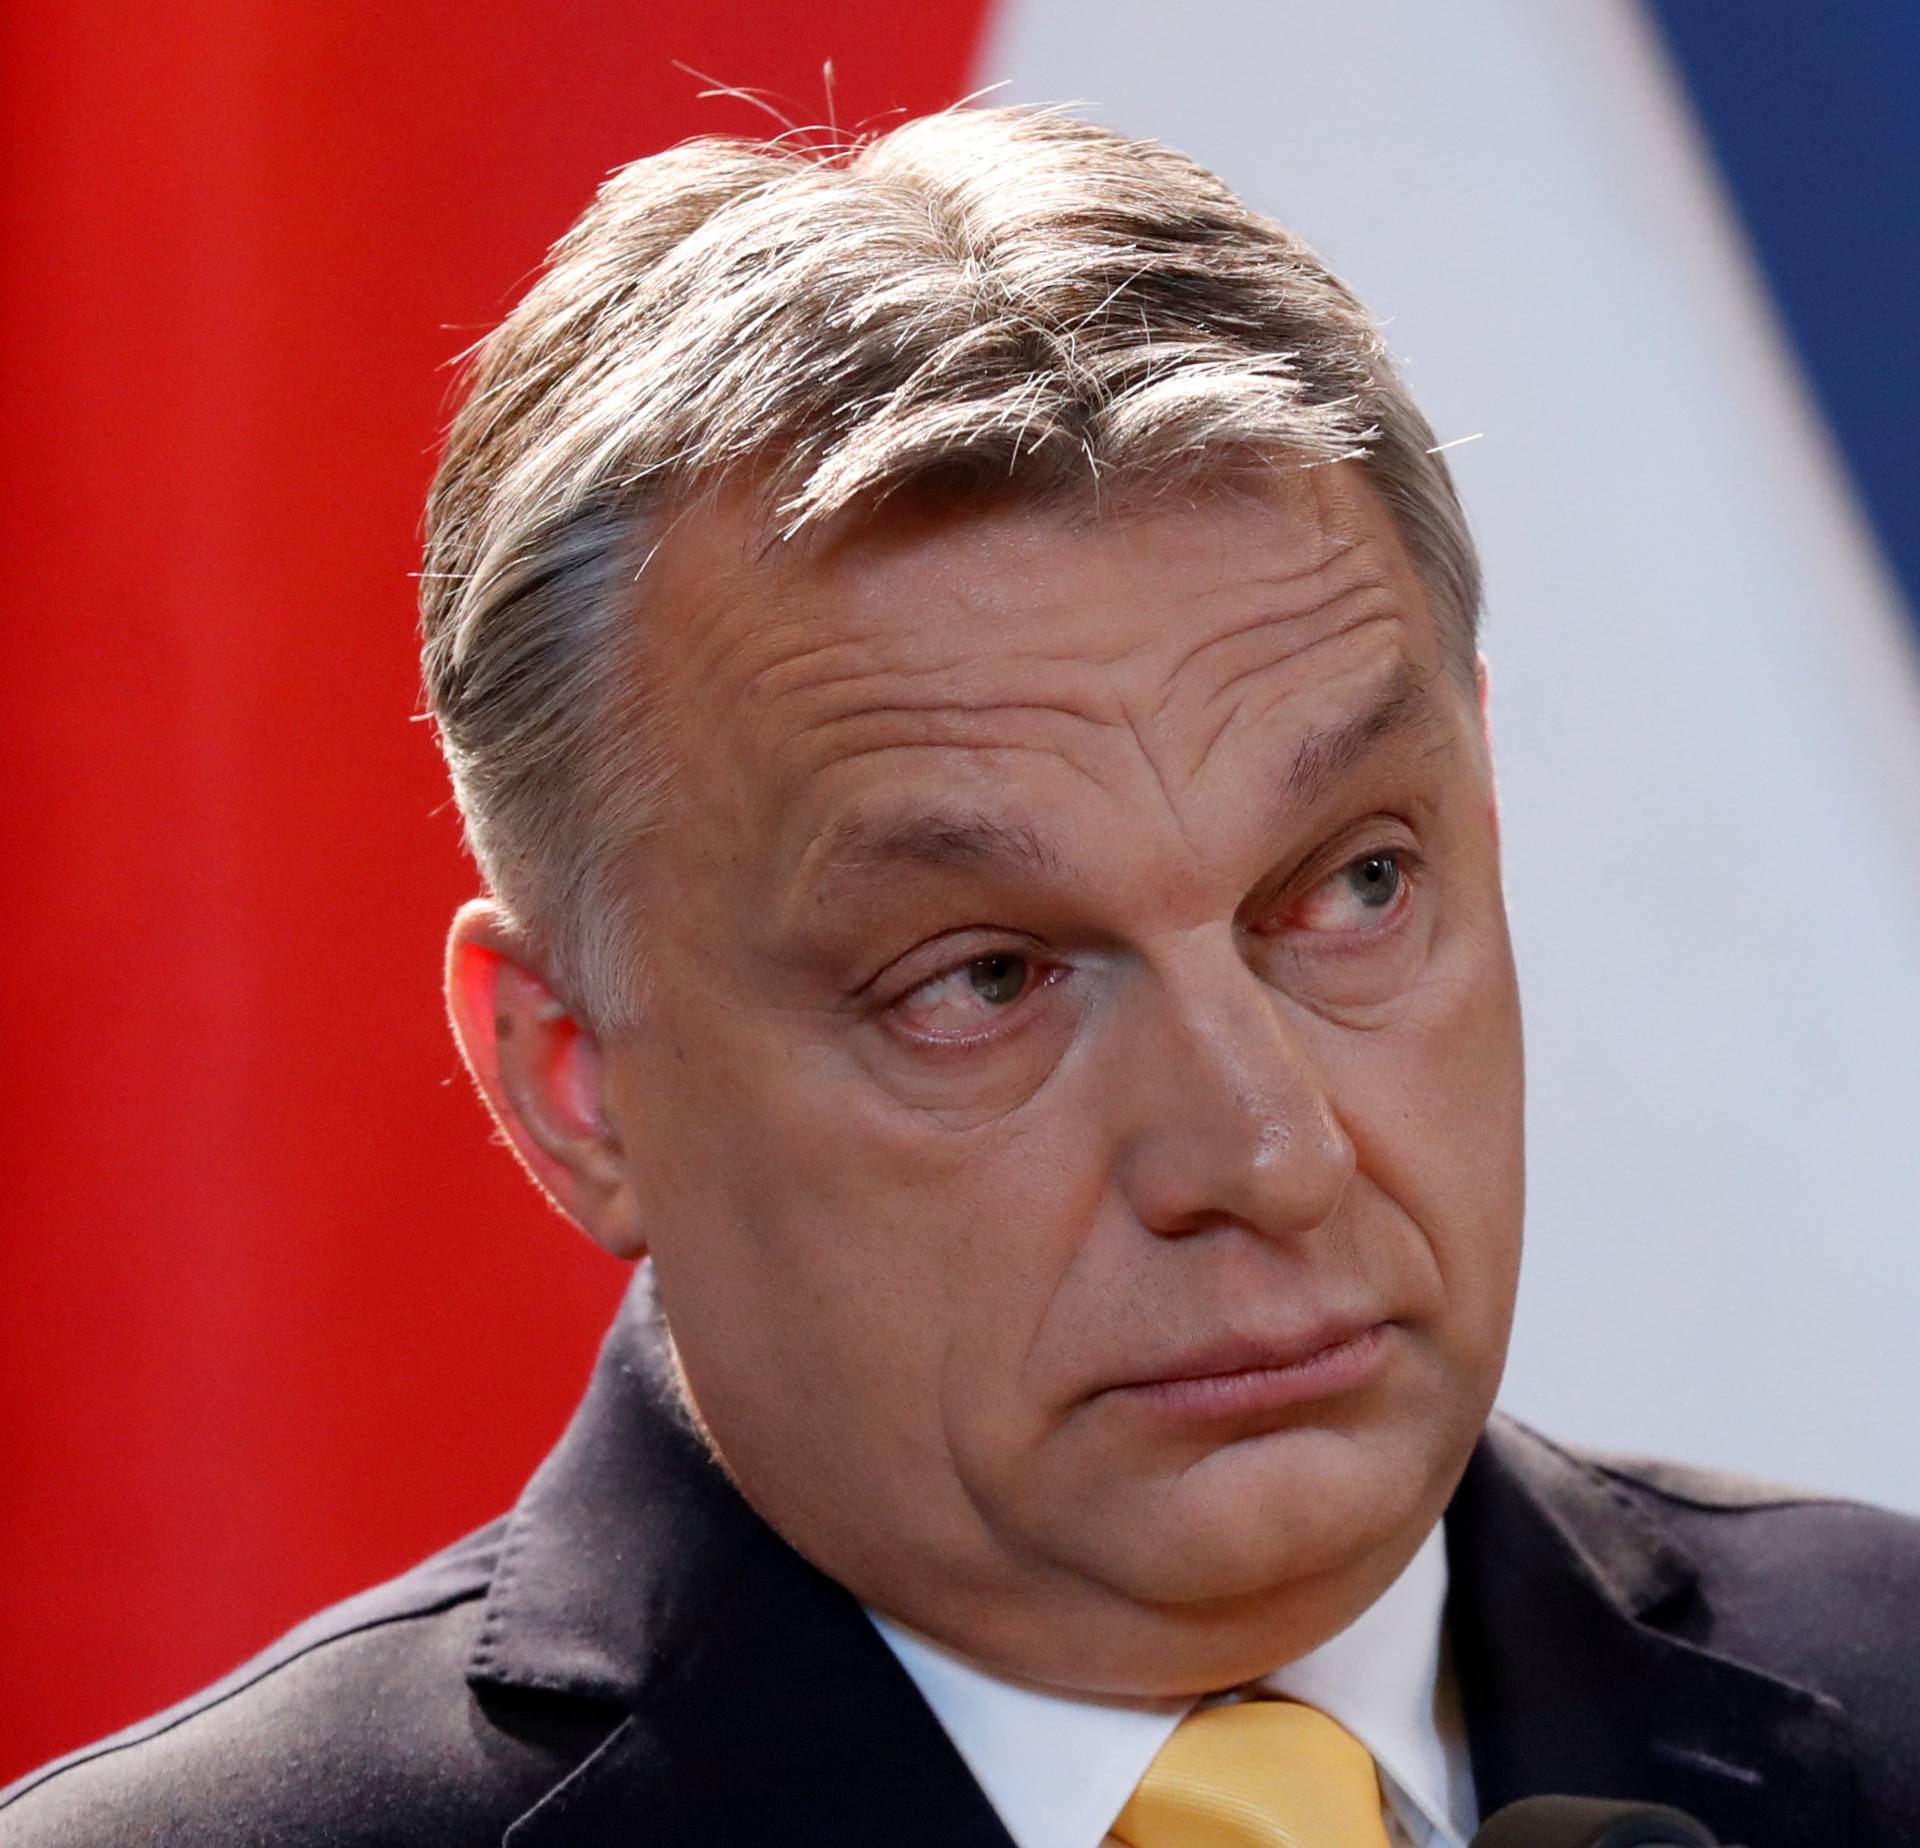 FILE PHOTO: Hungarian Prime Minister Viktor Orban speaks during a press conference in Budapest